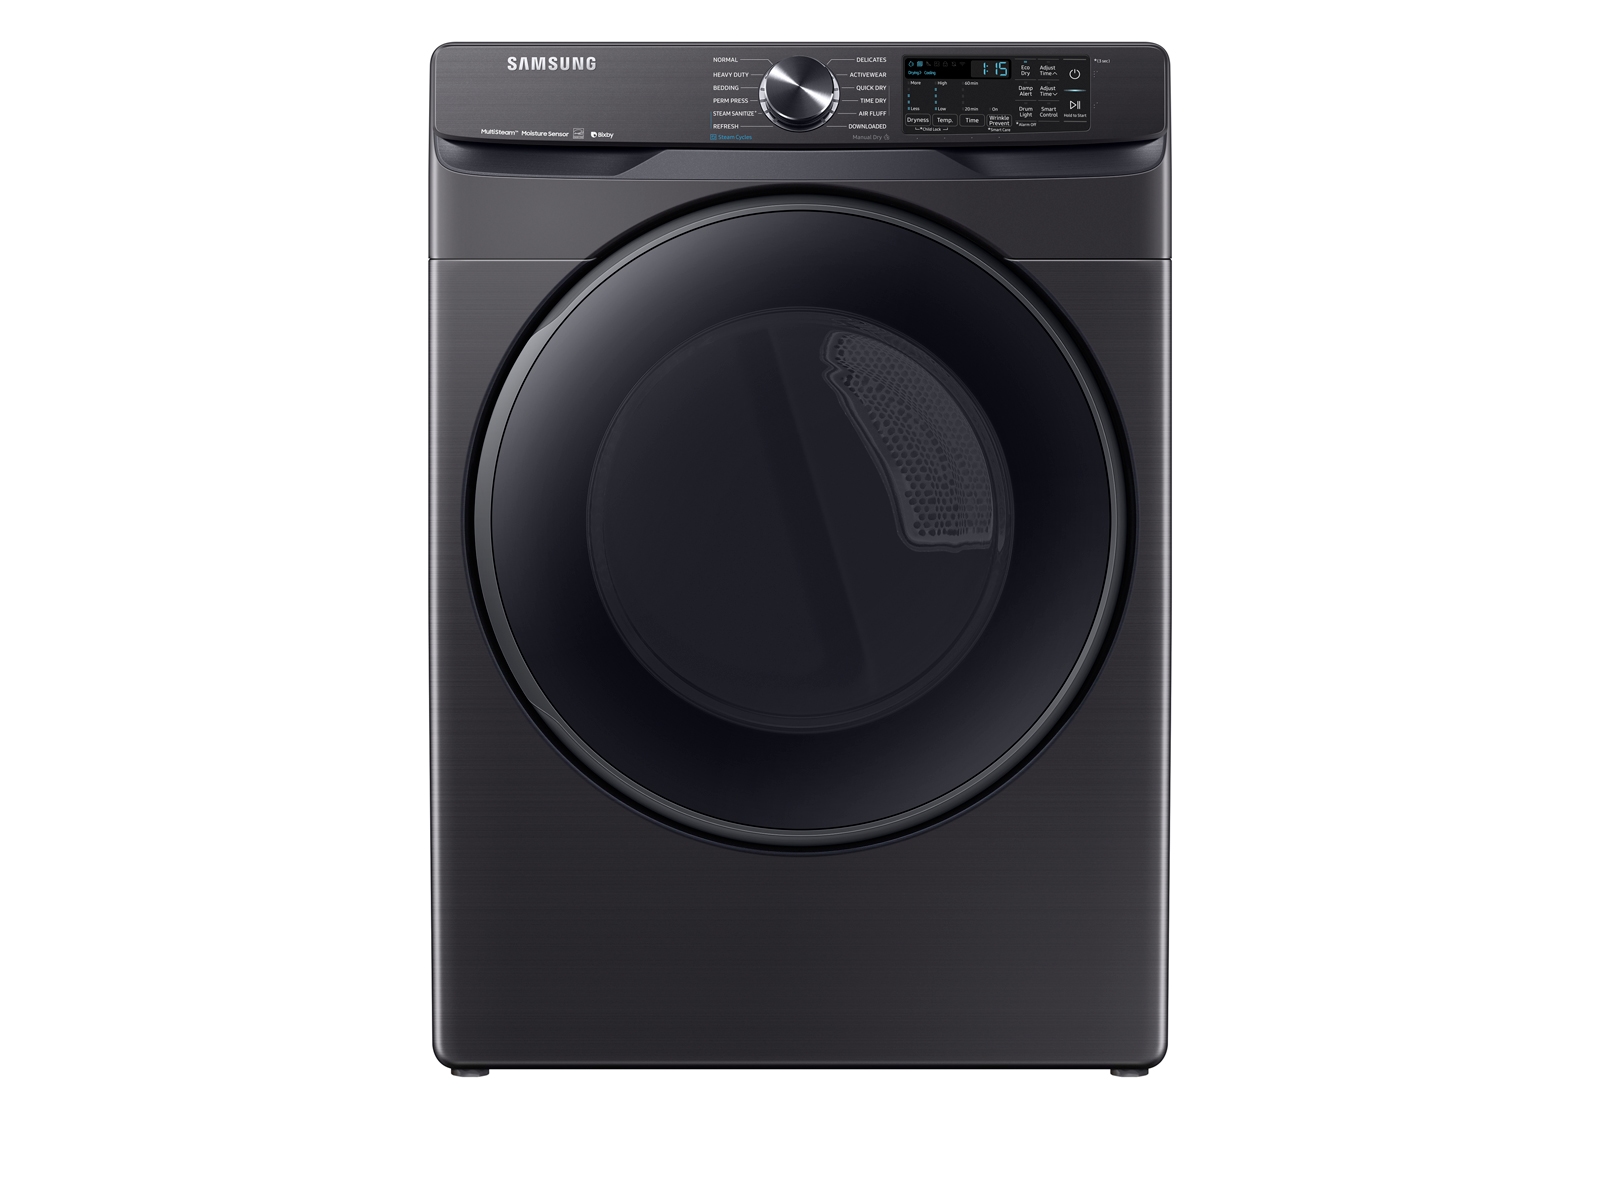 Samsung 7.5 cu. ft. Smart Gas Dryer with Steam Sanitize+ in Black Stainless Steel(DVG50R8500V/A3)